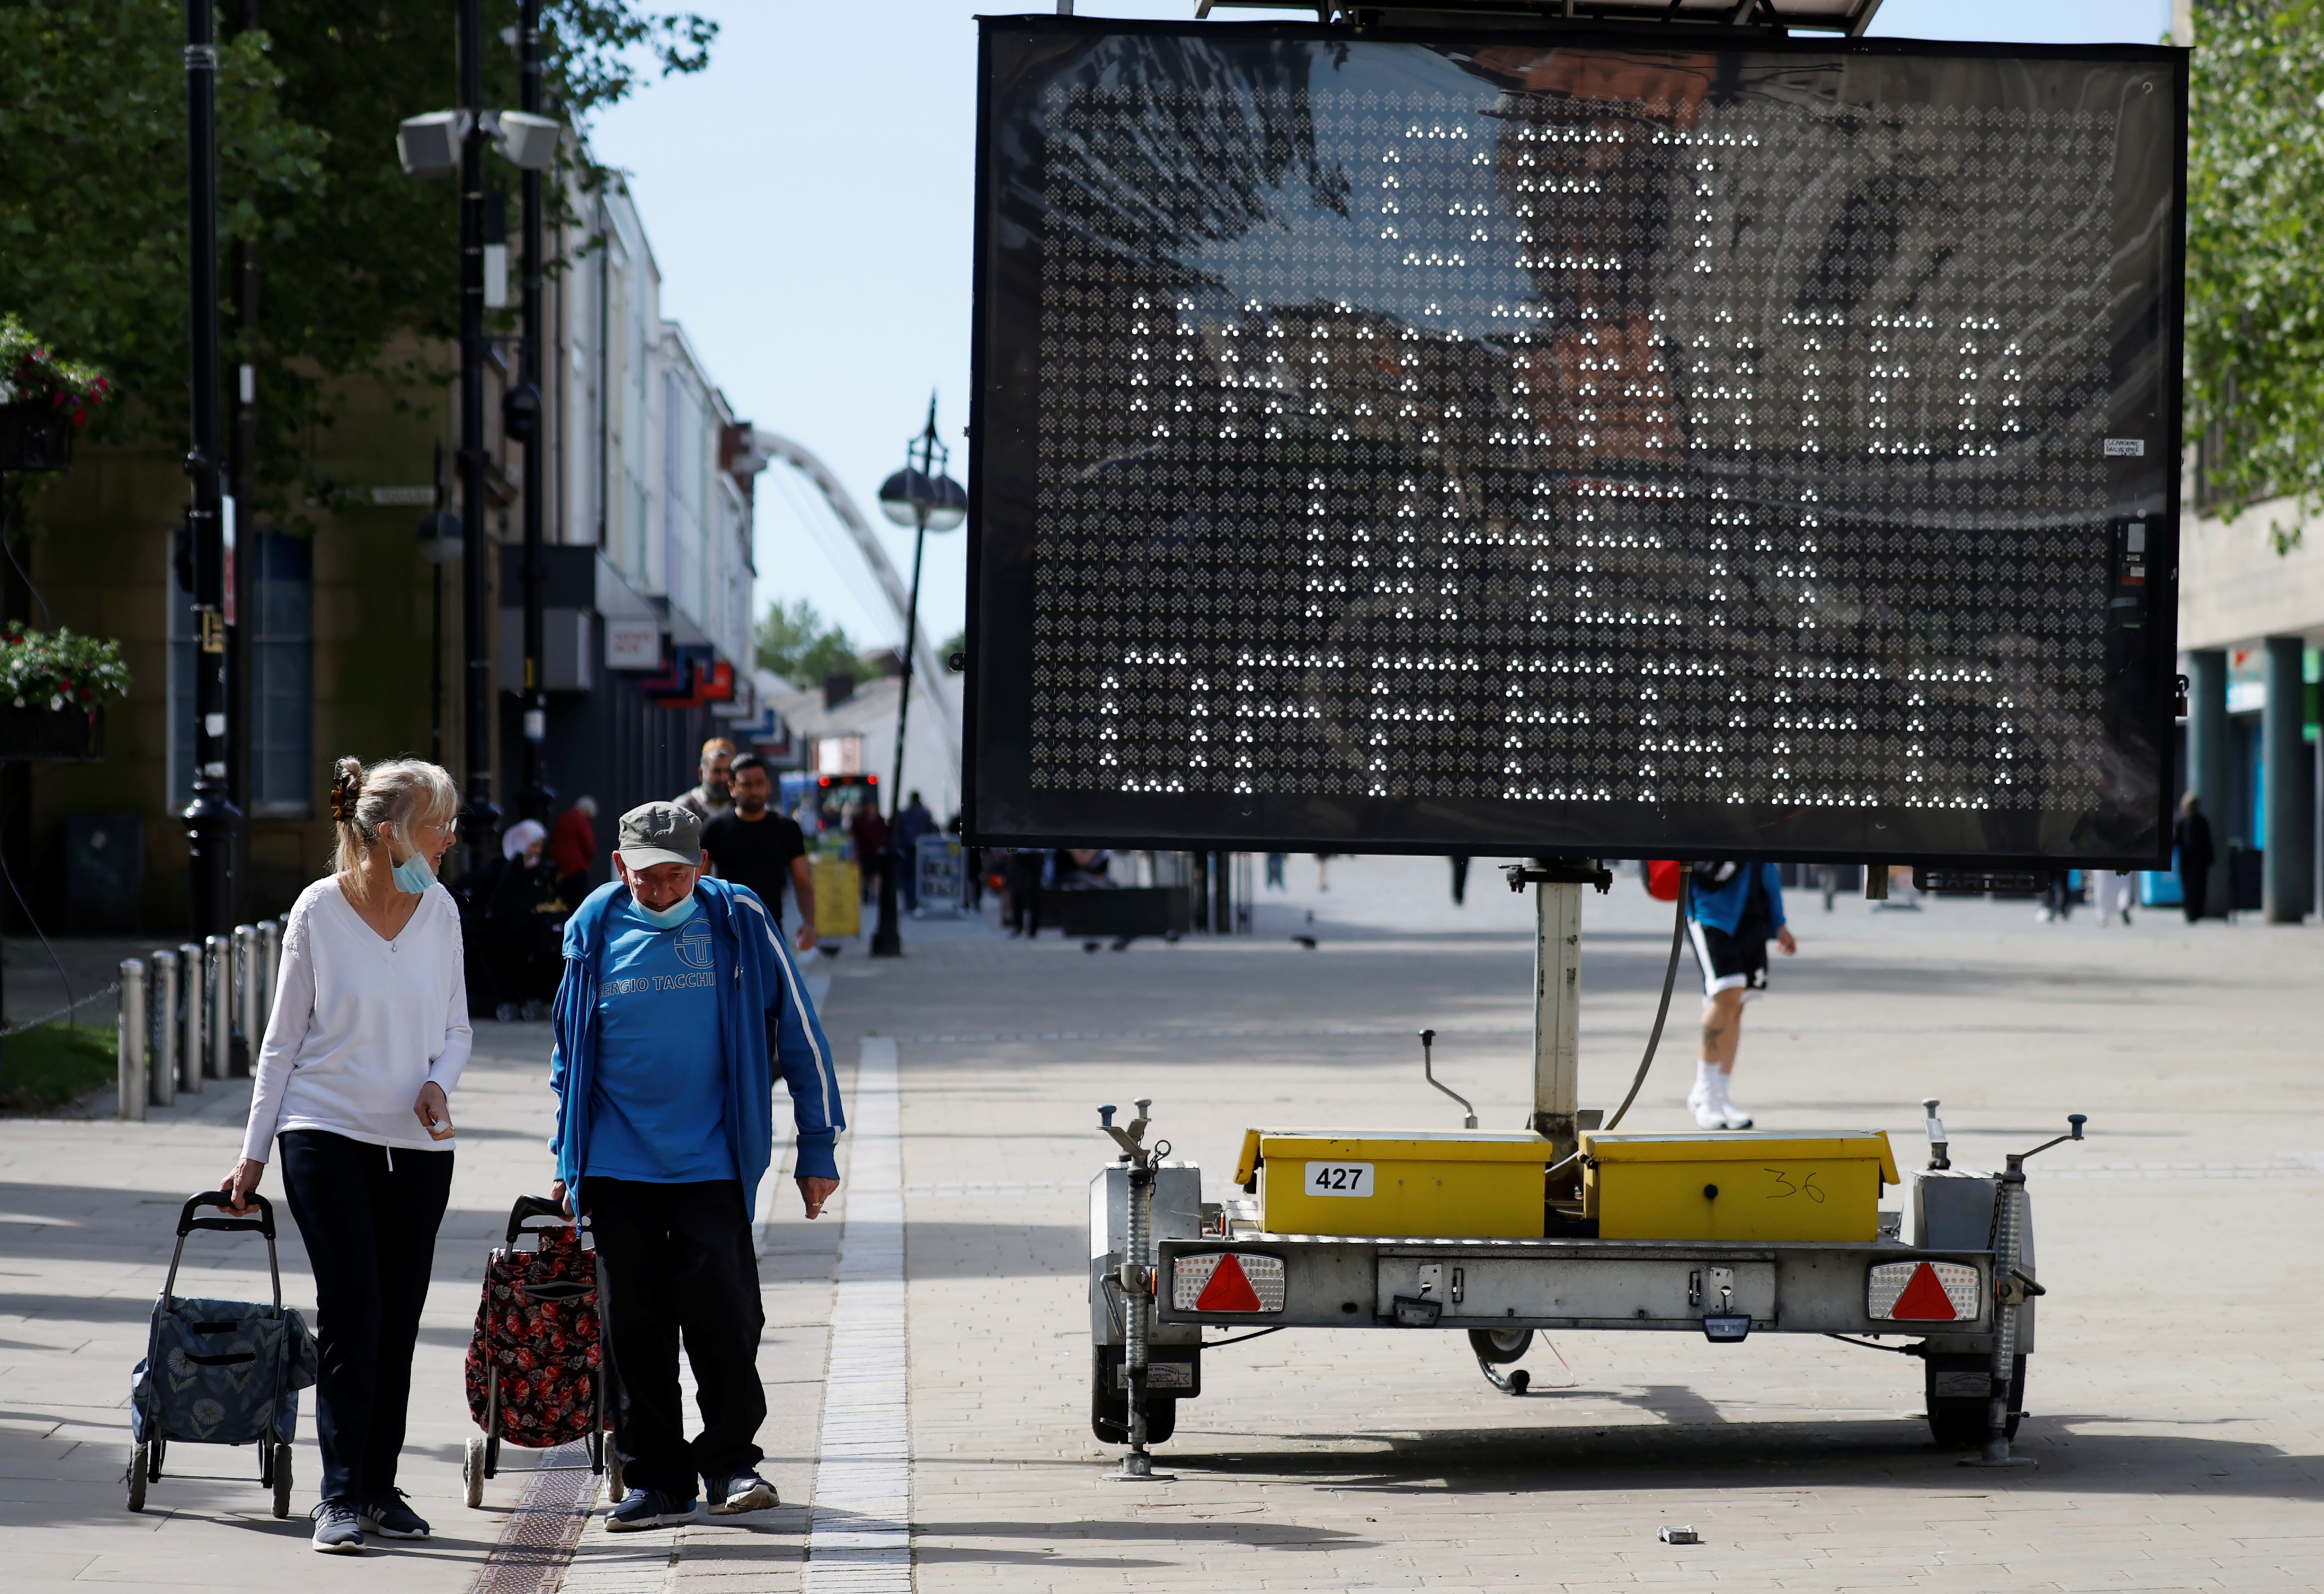 People pull shopping carts as they walk past an information board, amid the COVID-19 outbreak, in Bolton